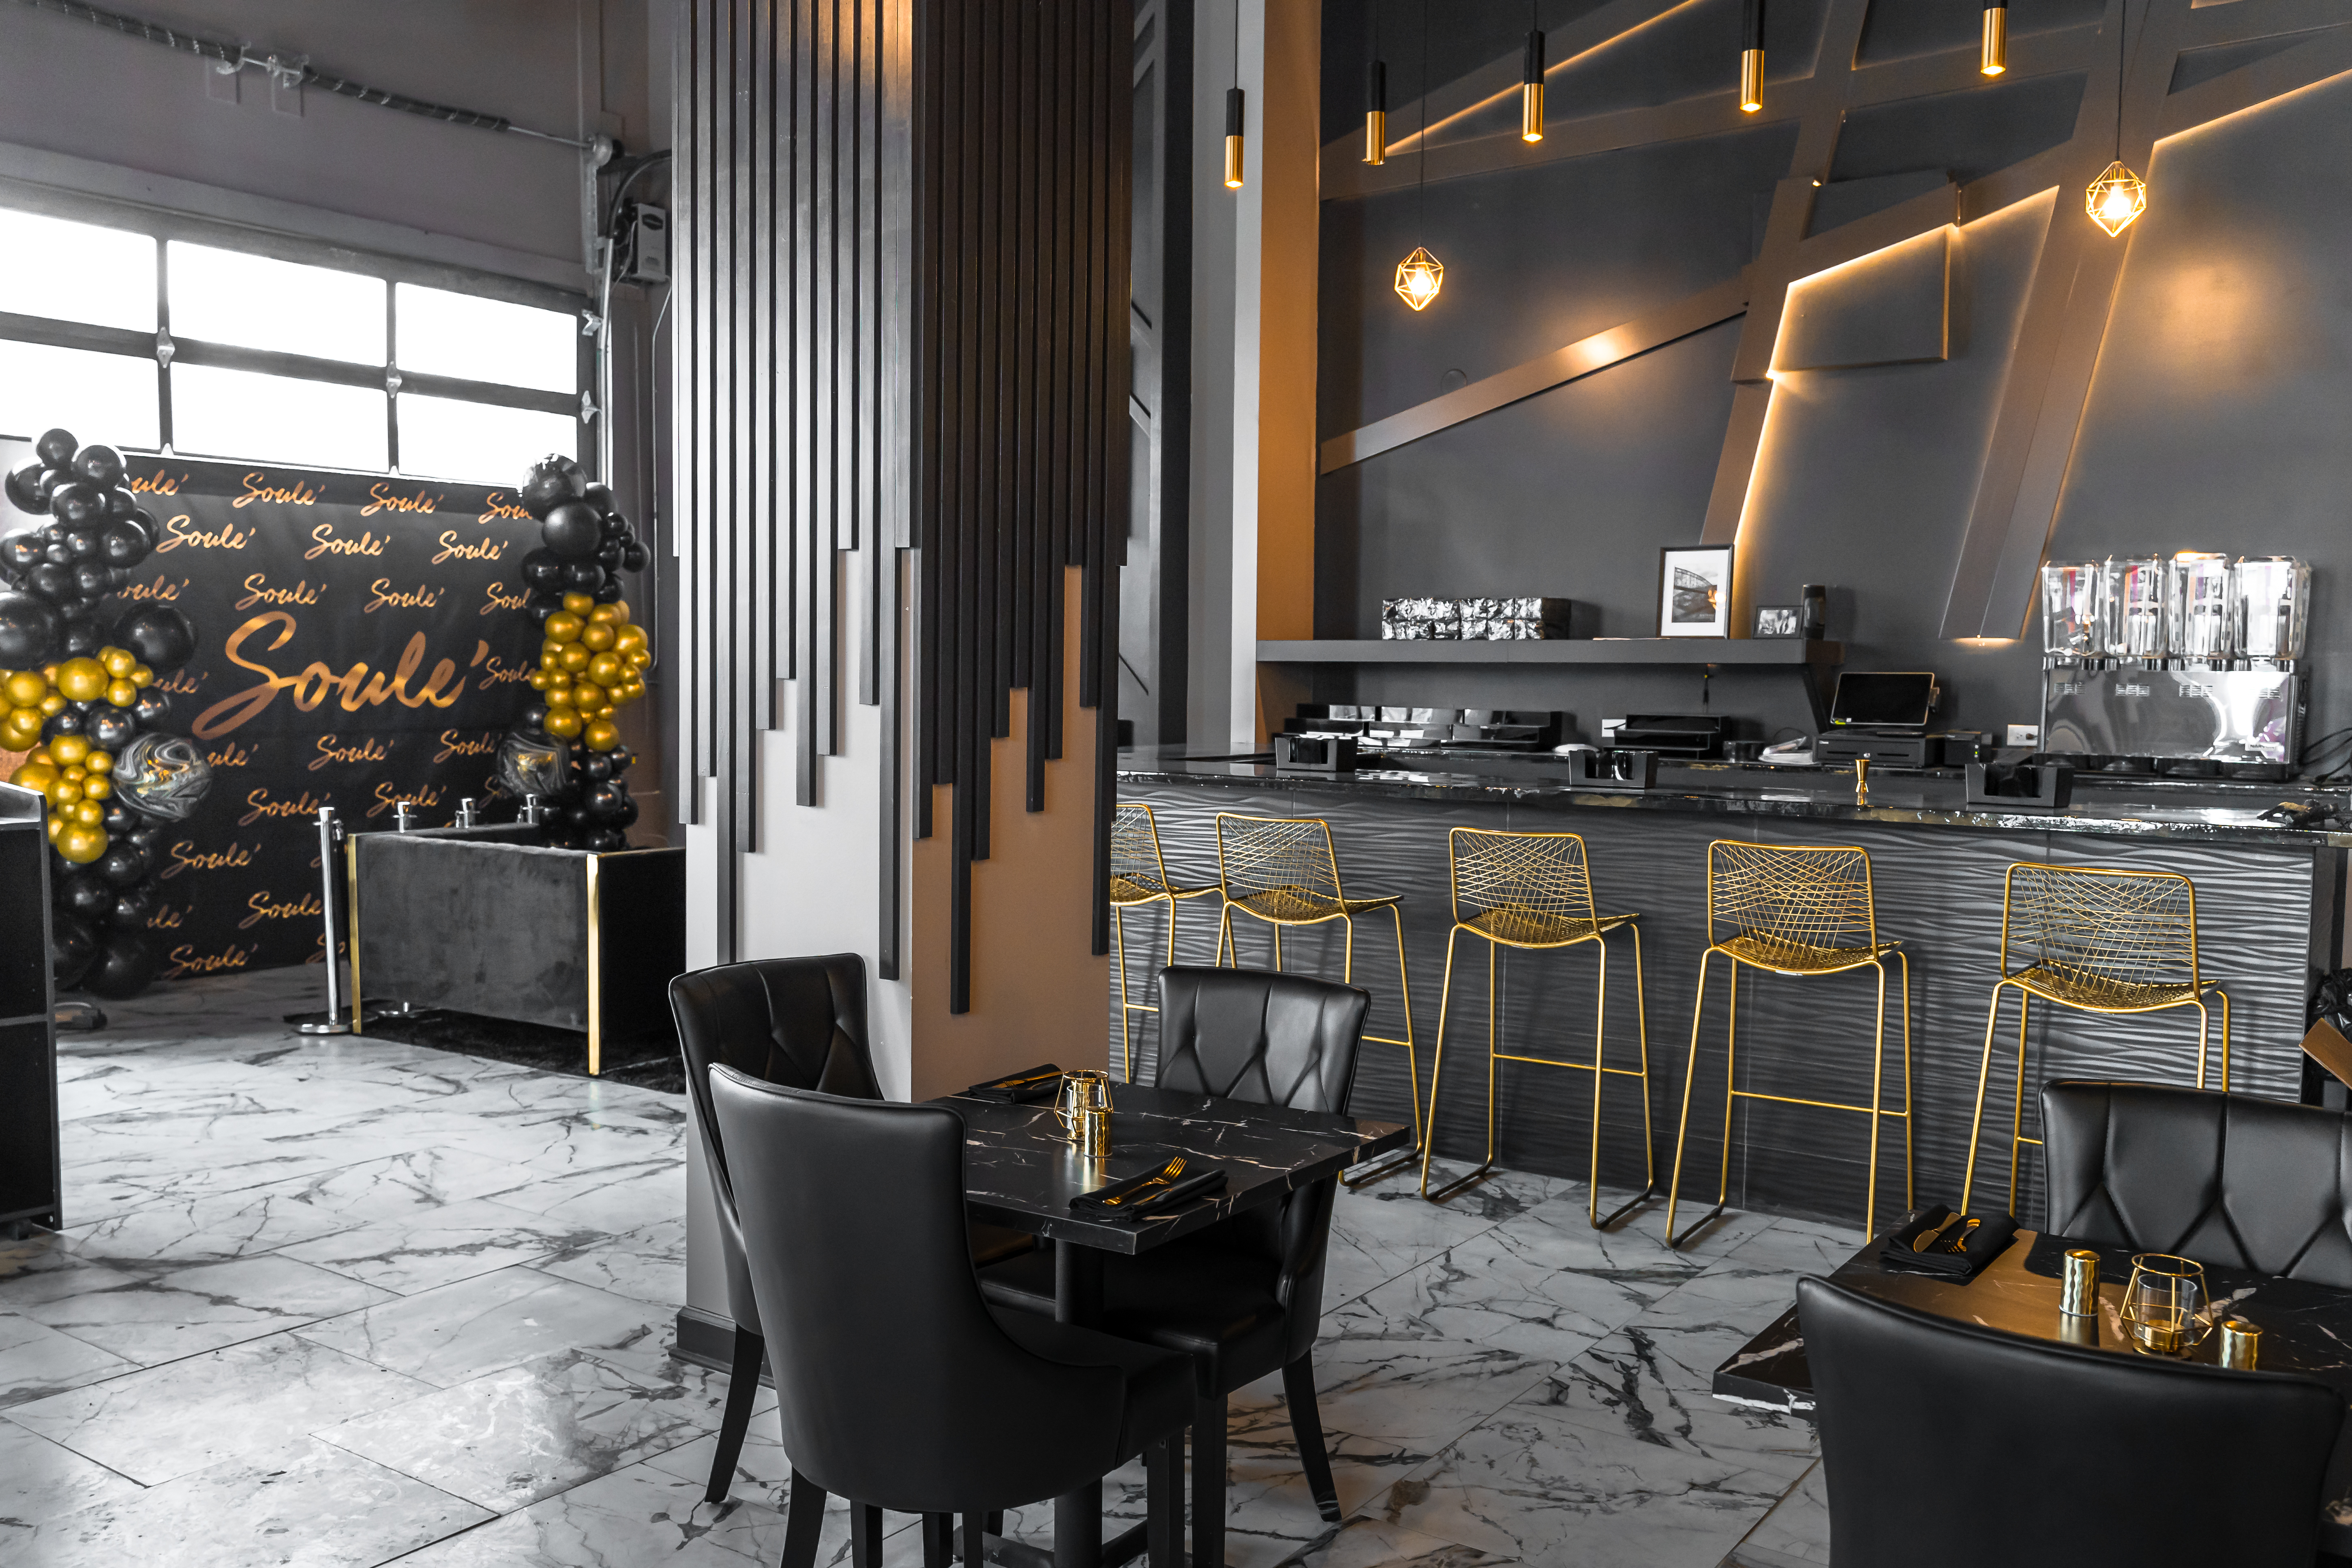 A bar and restaurant with lots of black and golds.